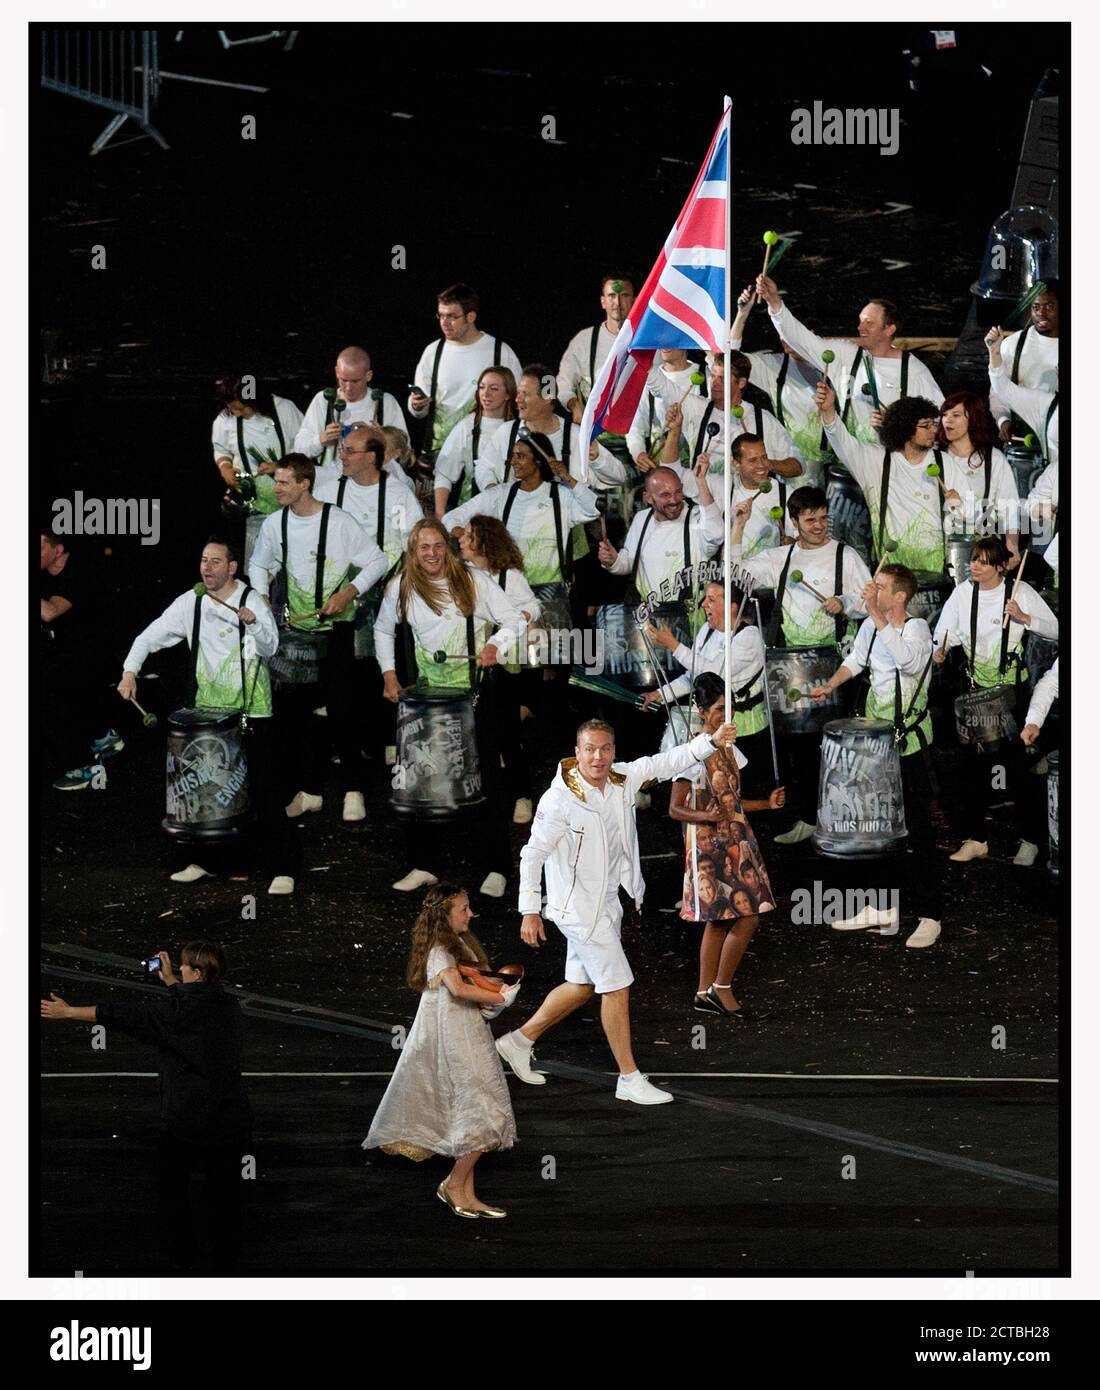 SIR CHRIS HOY CARRIES THE GB FLAG AND LEADS TEAM GB INTO THE STADIUM DURING OPENING CEREMONY OF THE LONDON 2012 OLYMPICS PICTURE : MARK PAIN / ALAMY Stock Photo